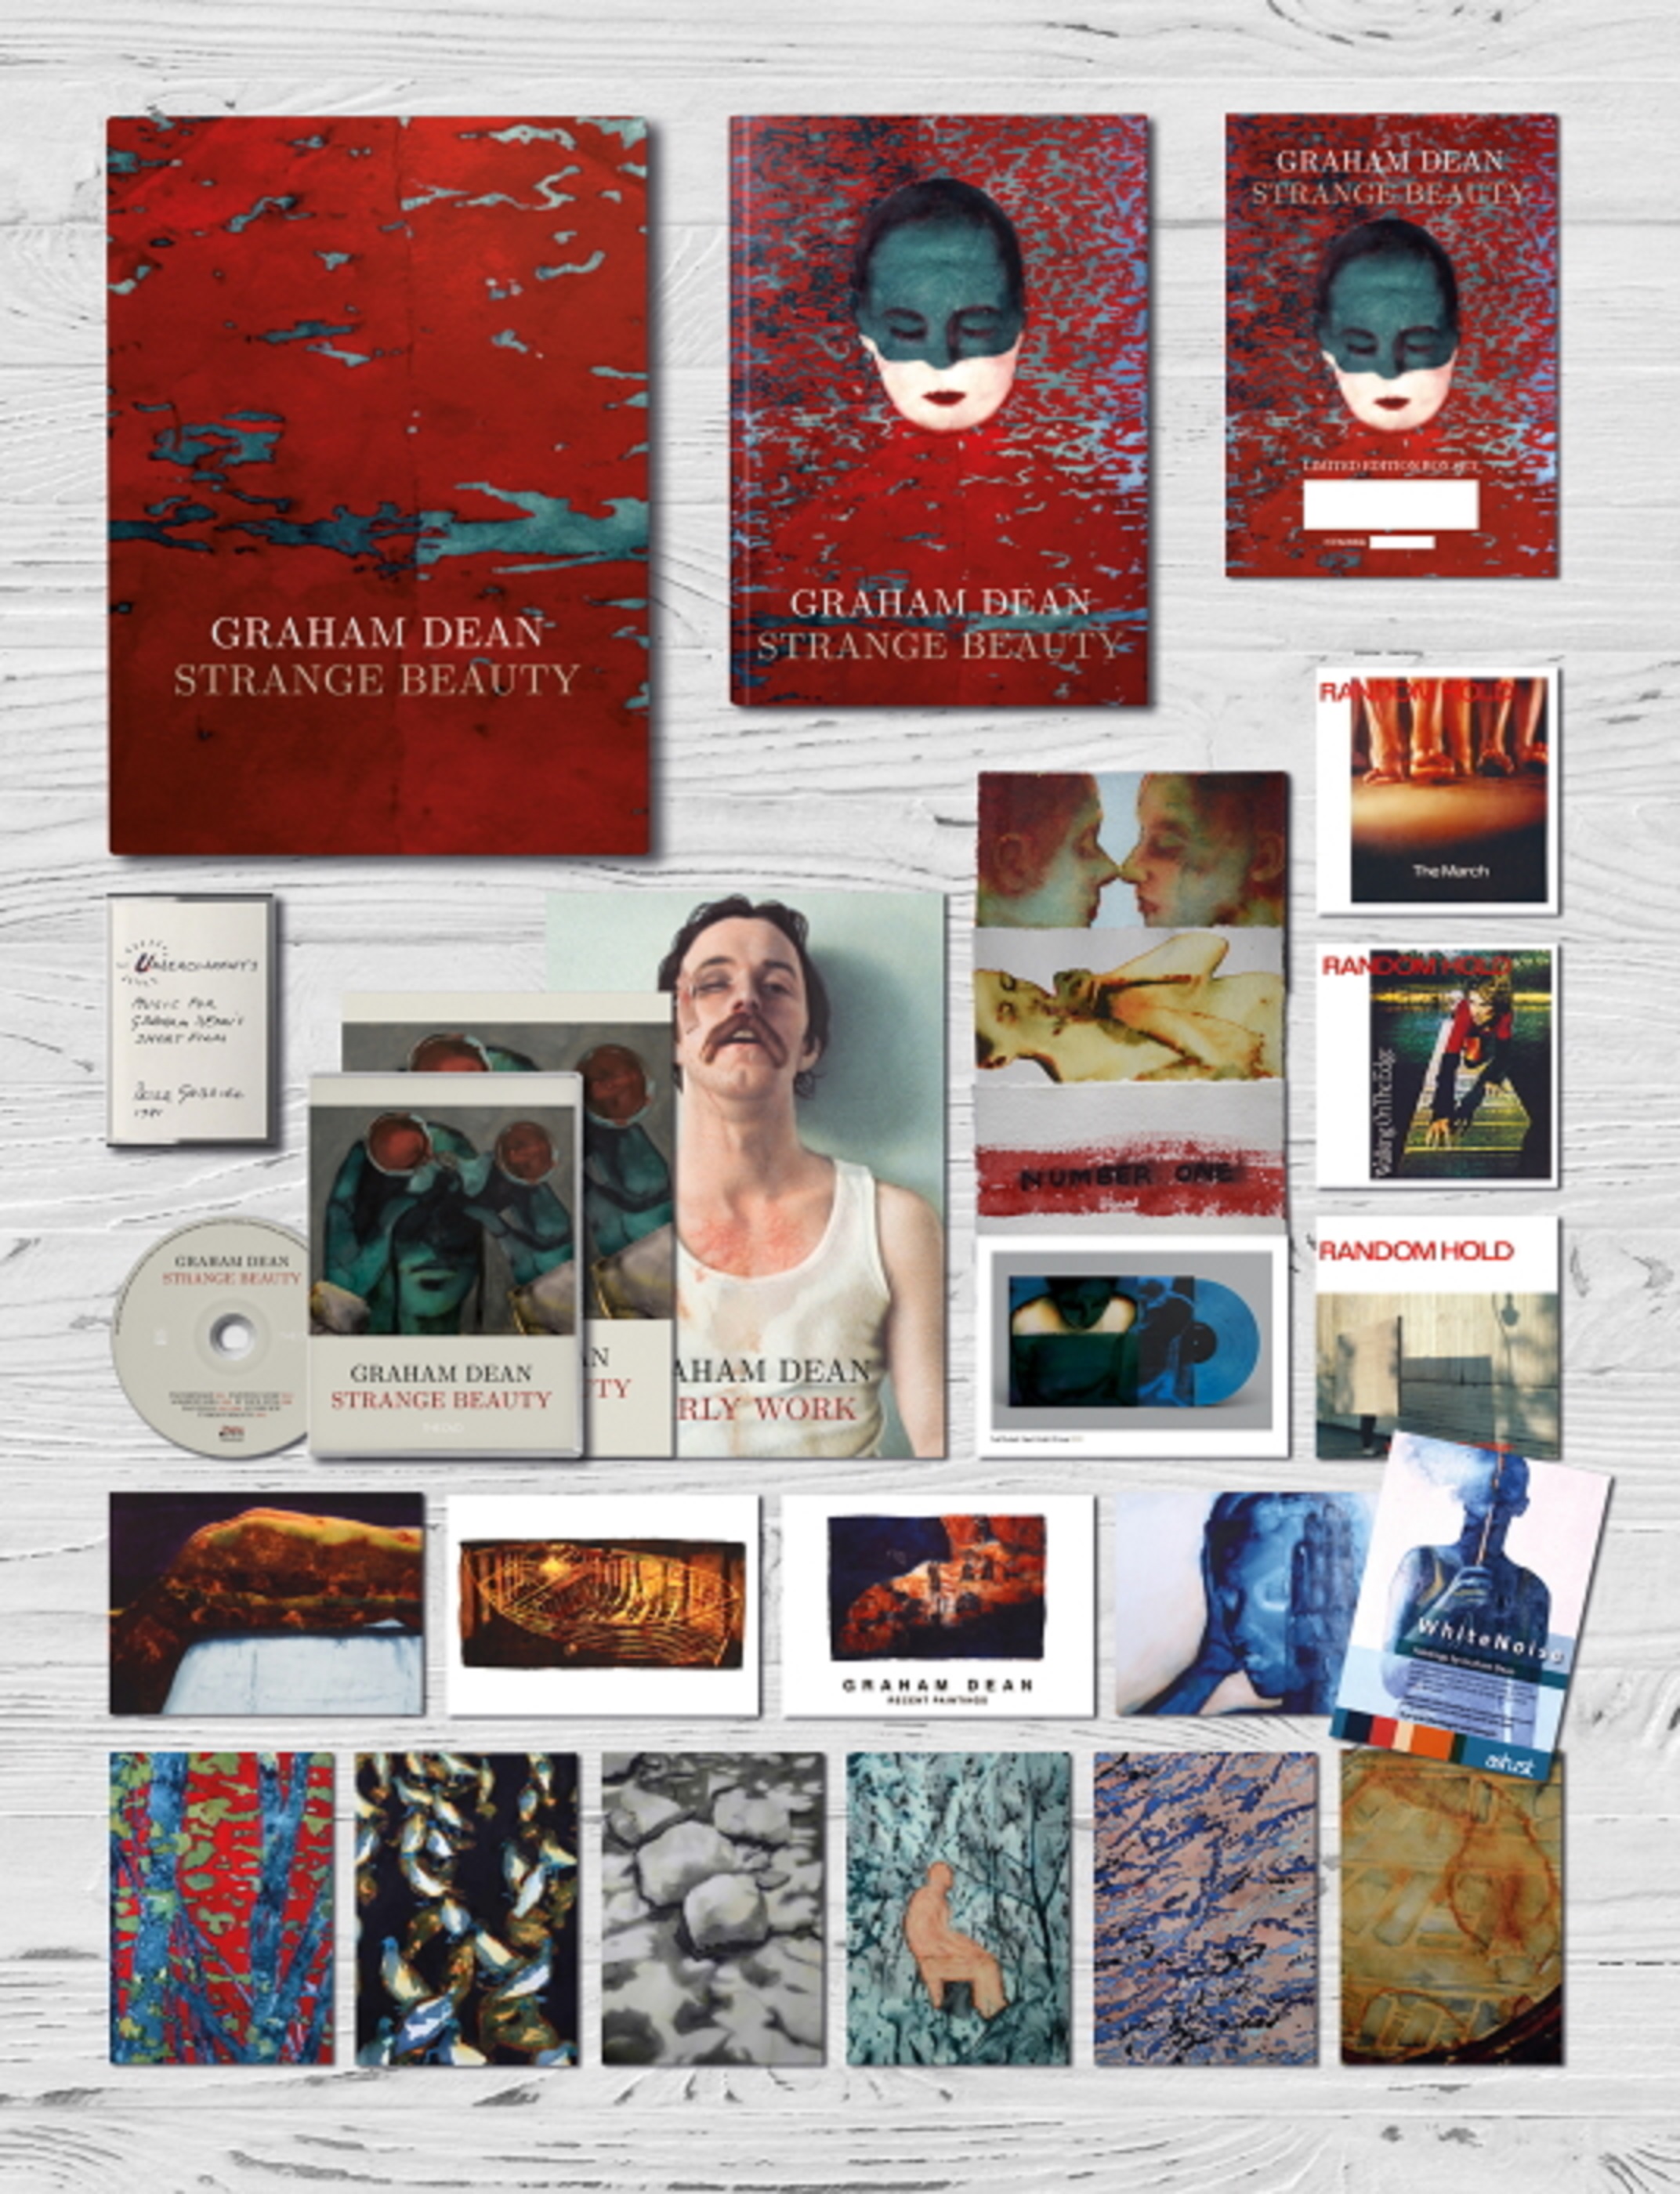 Renowned Artist Graham Dean “Strange Beauty” Deluxe Edition Box Set With Book & DVD Featuring Unreleased Soundtrack By Peter Gabriel